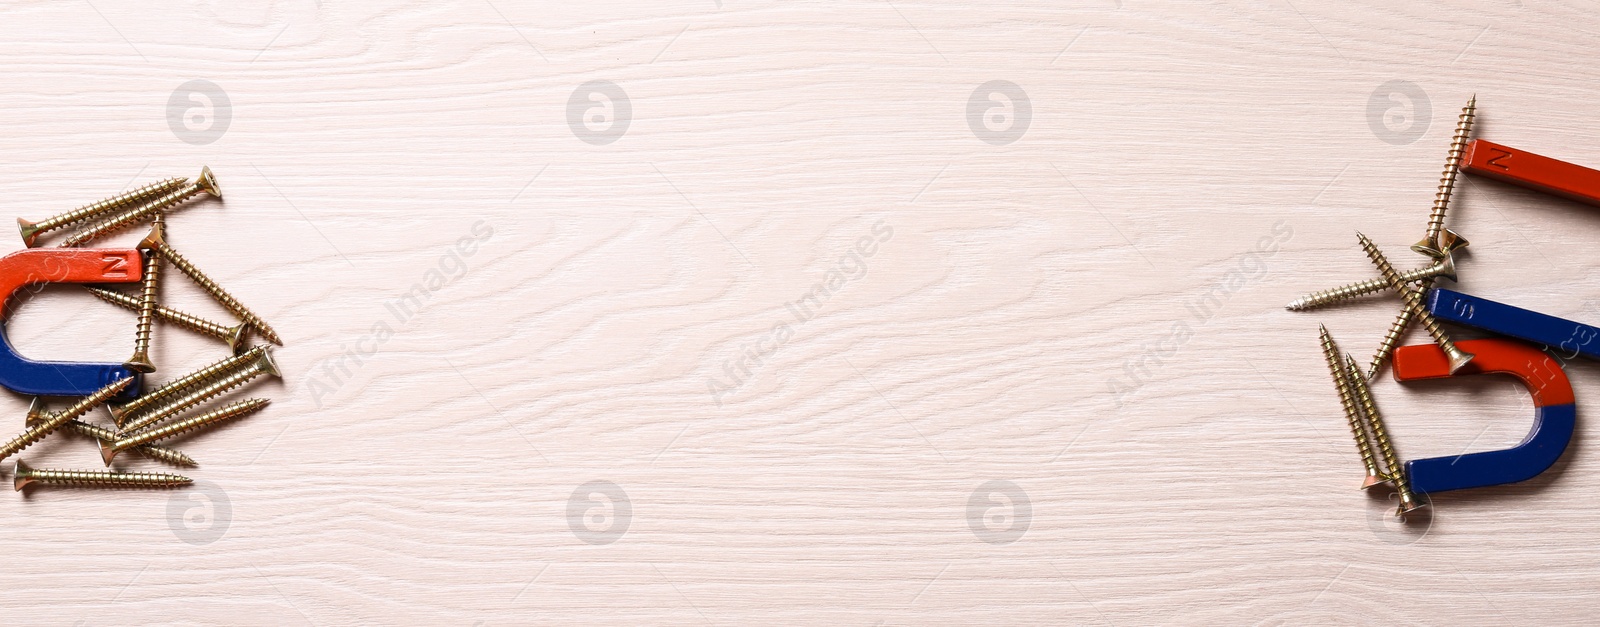 Photo of Magnets attracting screws on light wooden background, flat lay. Space for text